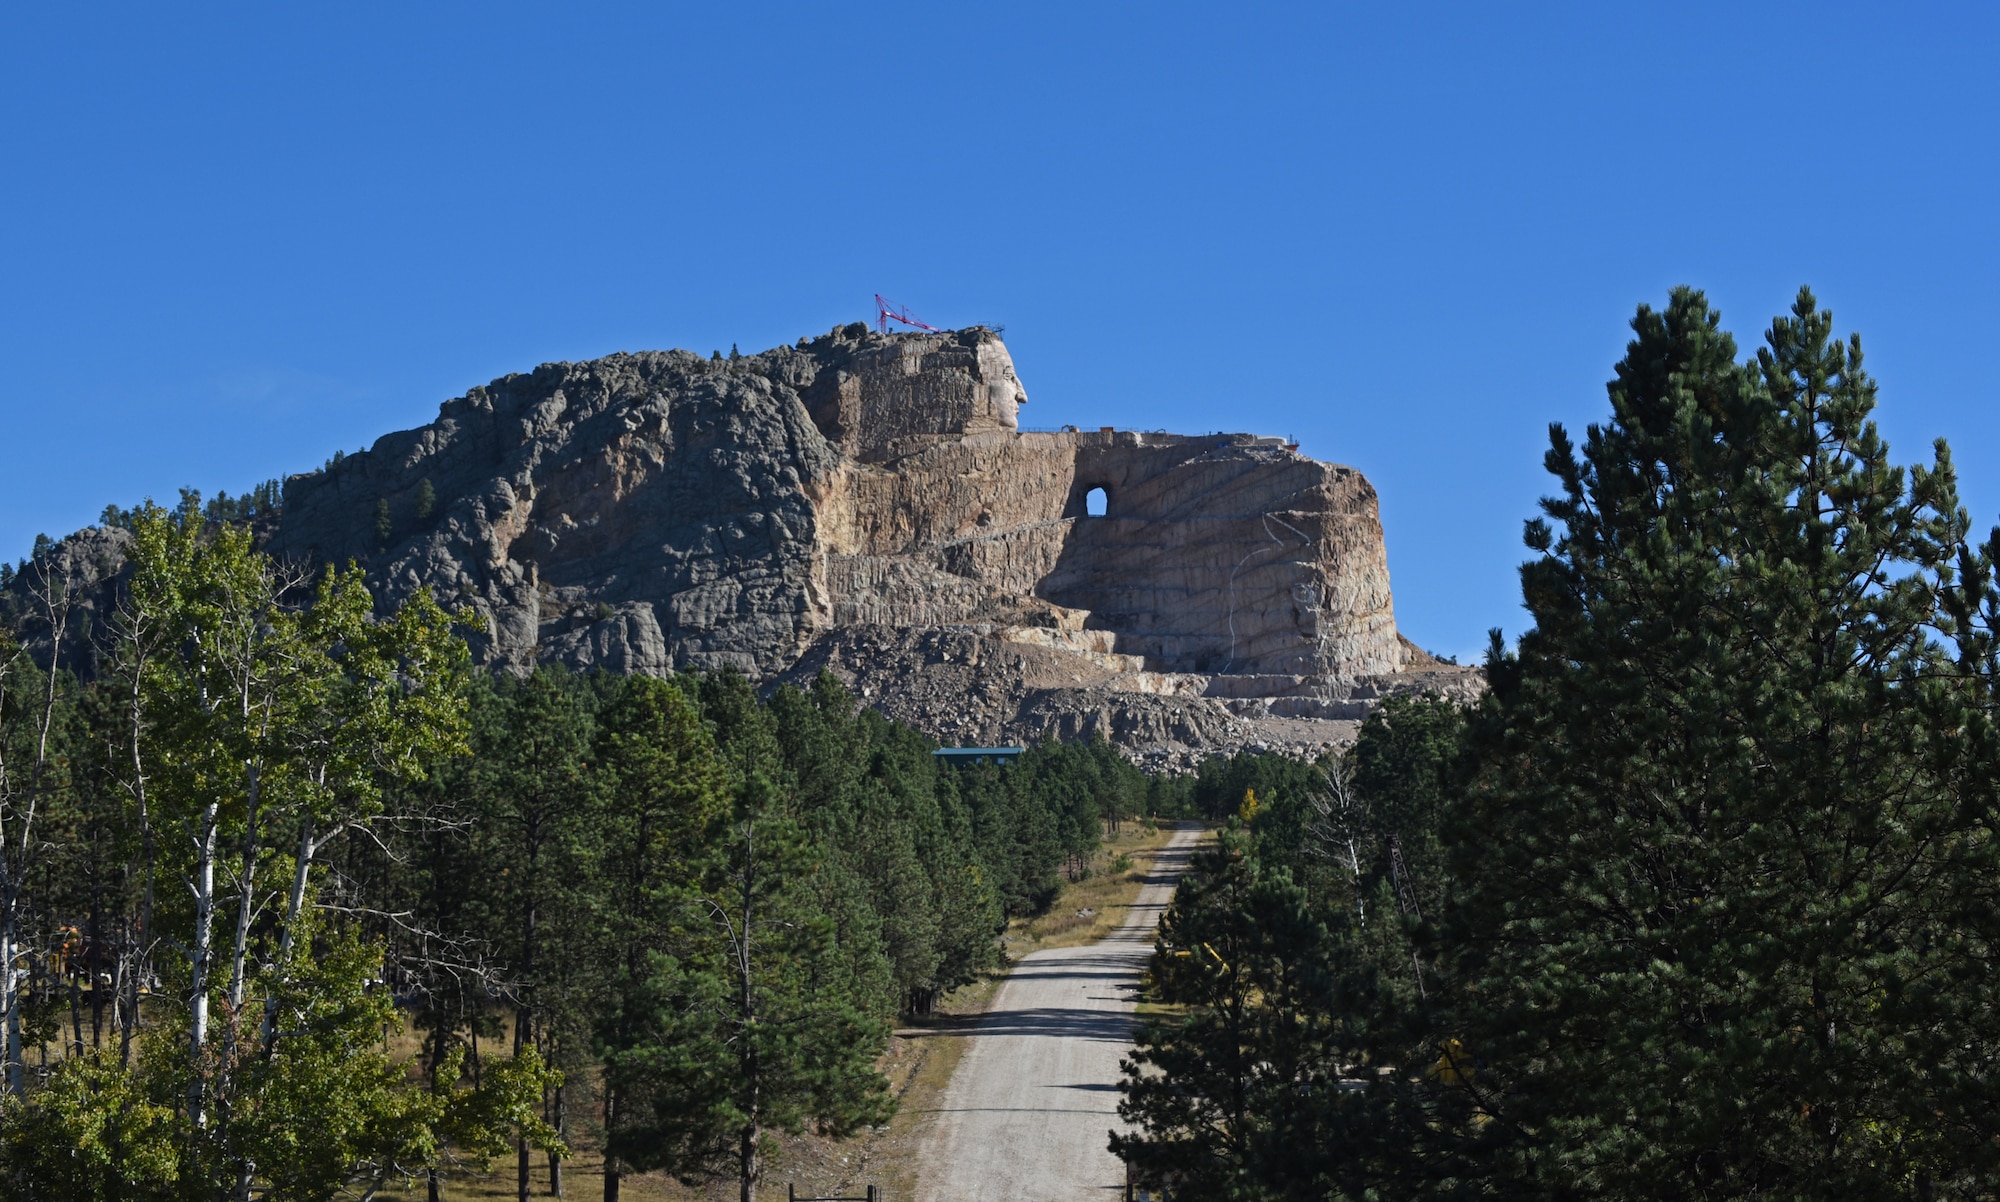 The 2018 Governors' Interstate Indian Council assembly was hosted at the Crazy Horse Memorial in Custer County, S.D., Sept. 26, 2018. Representatives from numerous states attended the 2018 GIIC assembly to discuss issues that influence the lives of Native American people across the country. (U.S. Air Force photo by Airman Christina M. Bennett)